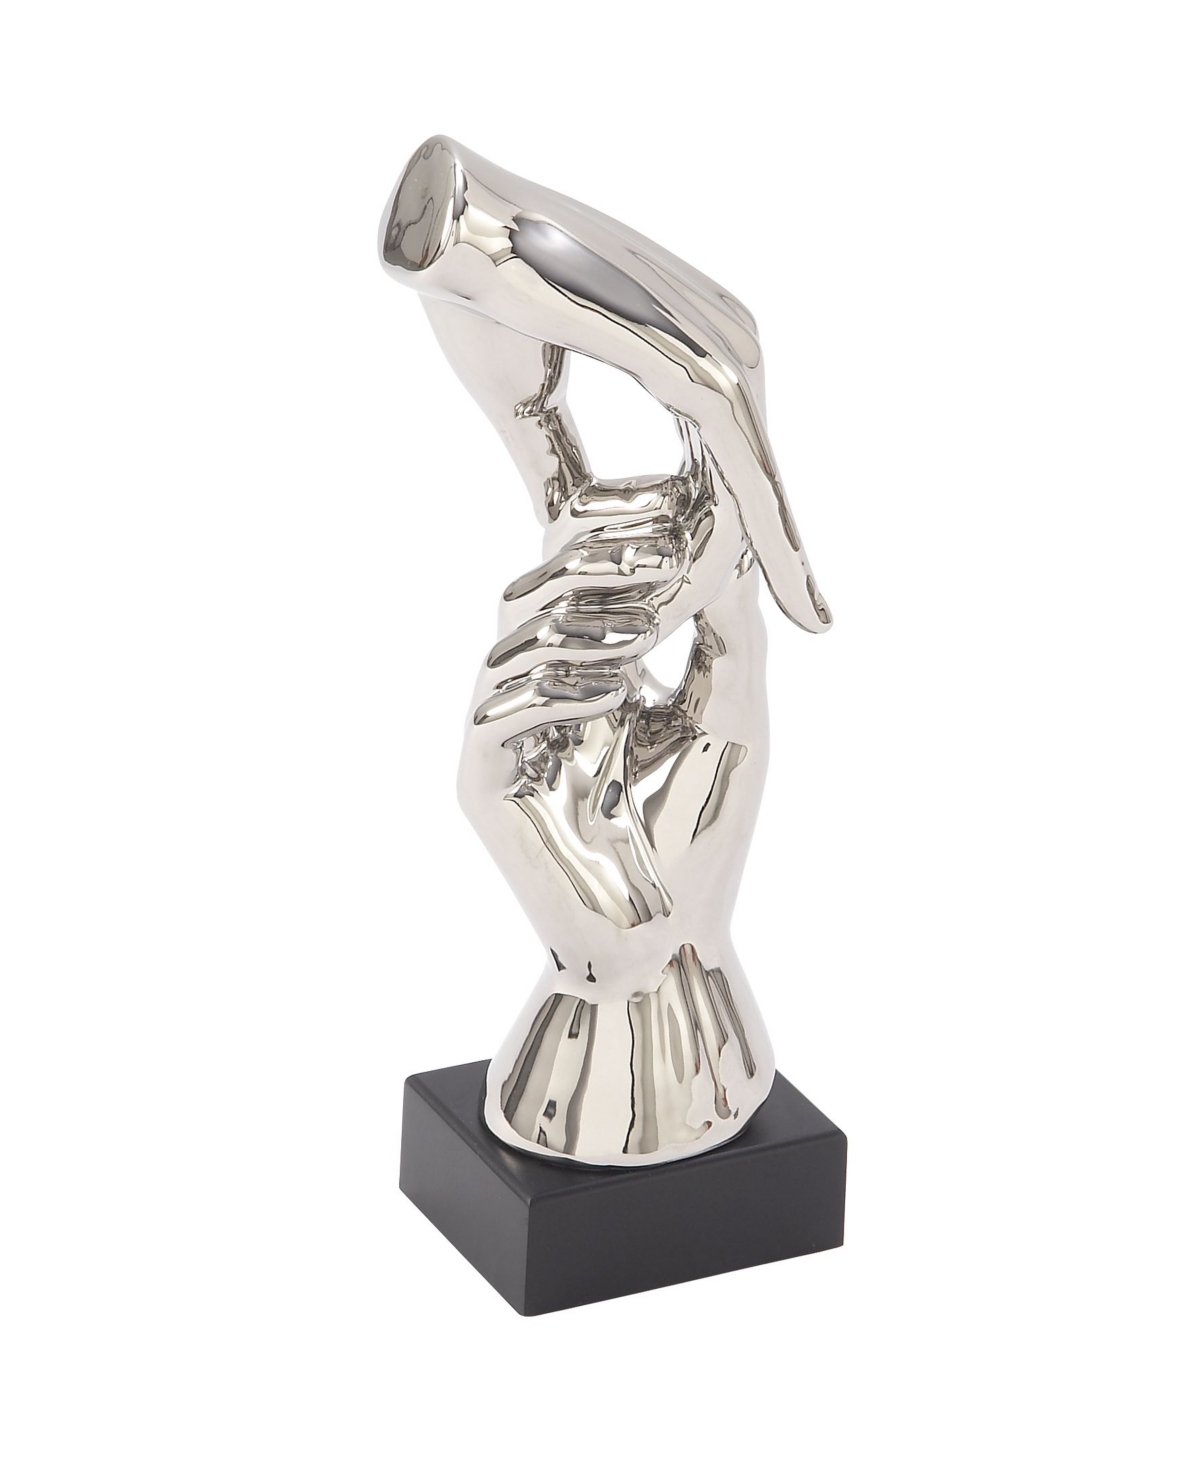 Rosemary Lane Ceramic Abstract Hand Sculpture, 5" X 4" In Silver-tone